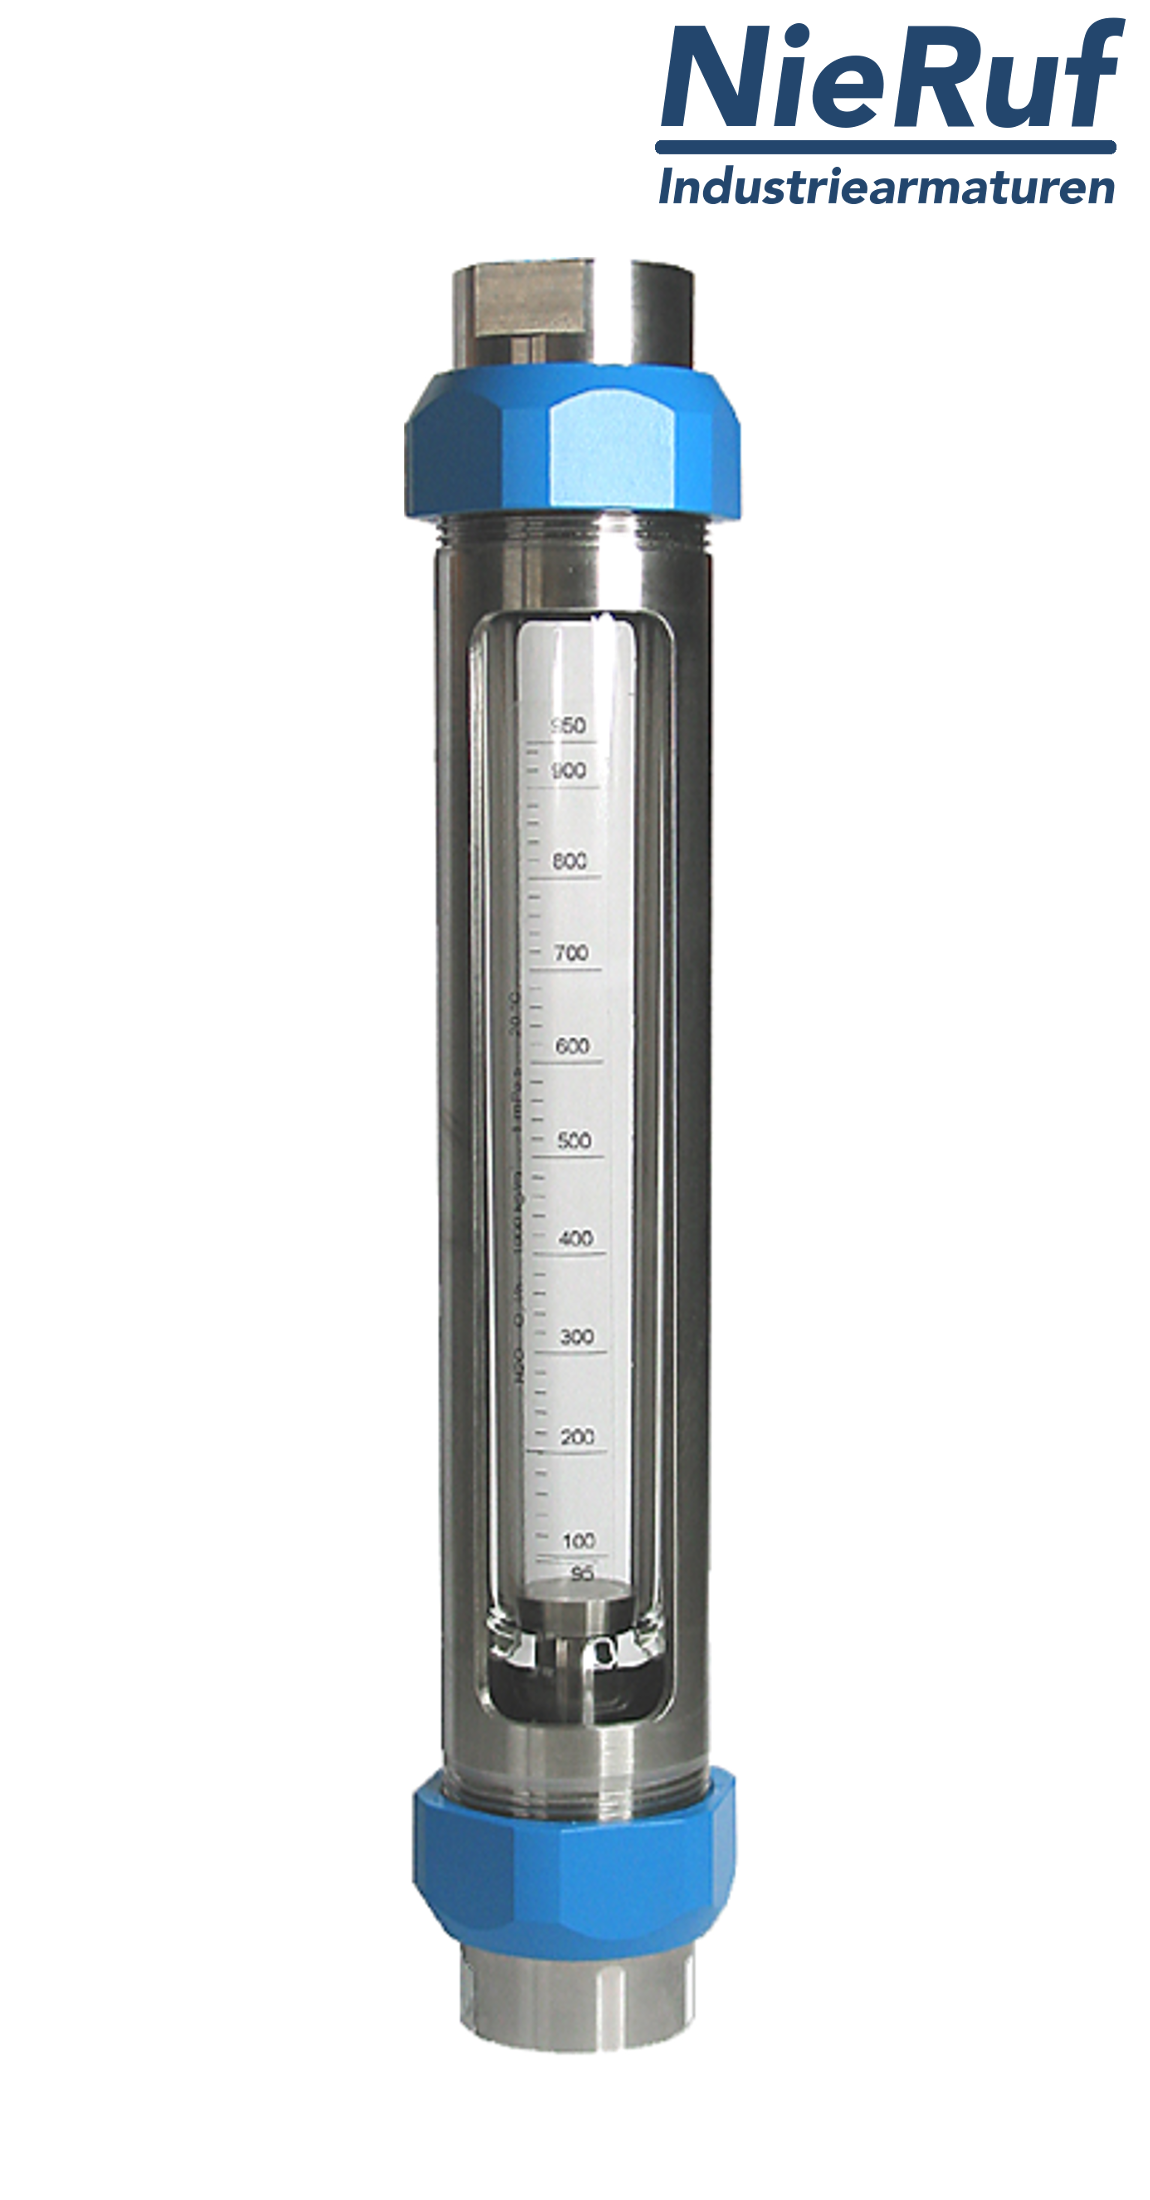 Variable area flowmeter stainless steel + borosilicate 1/2" inch 50.0 - 500.0 l/h water FKM